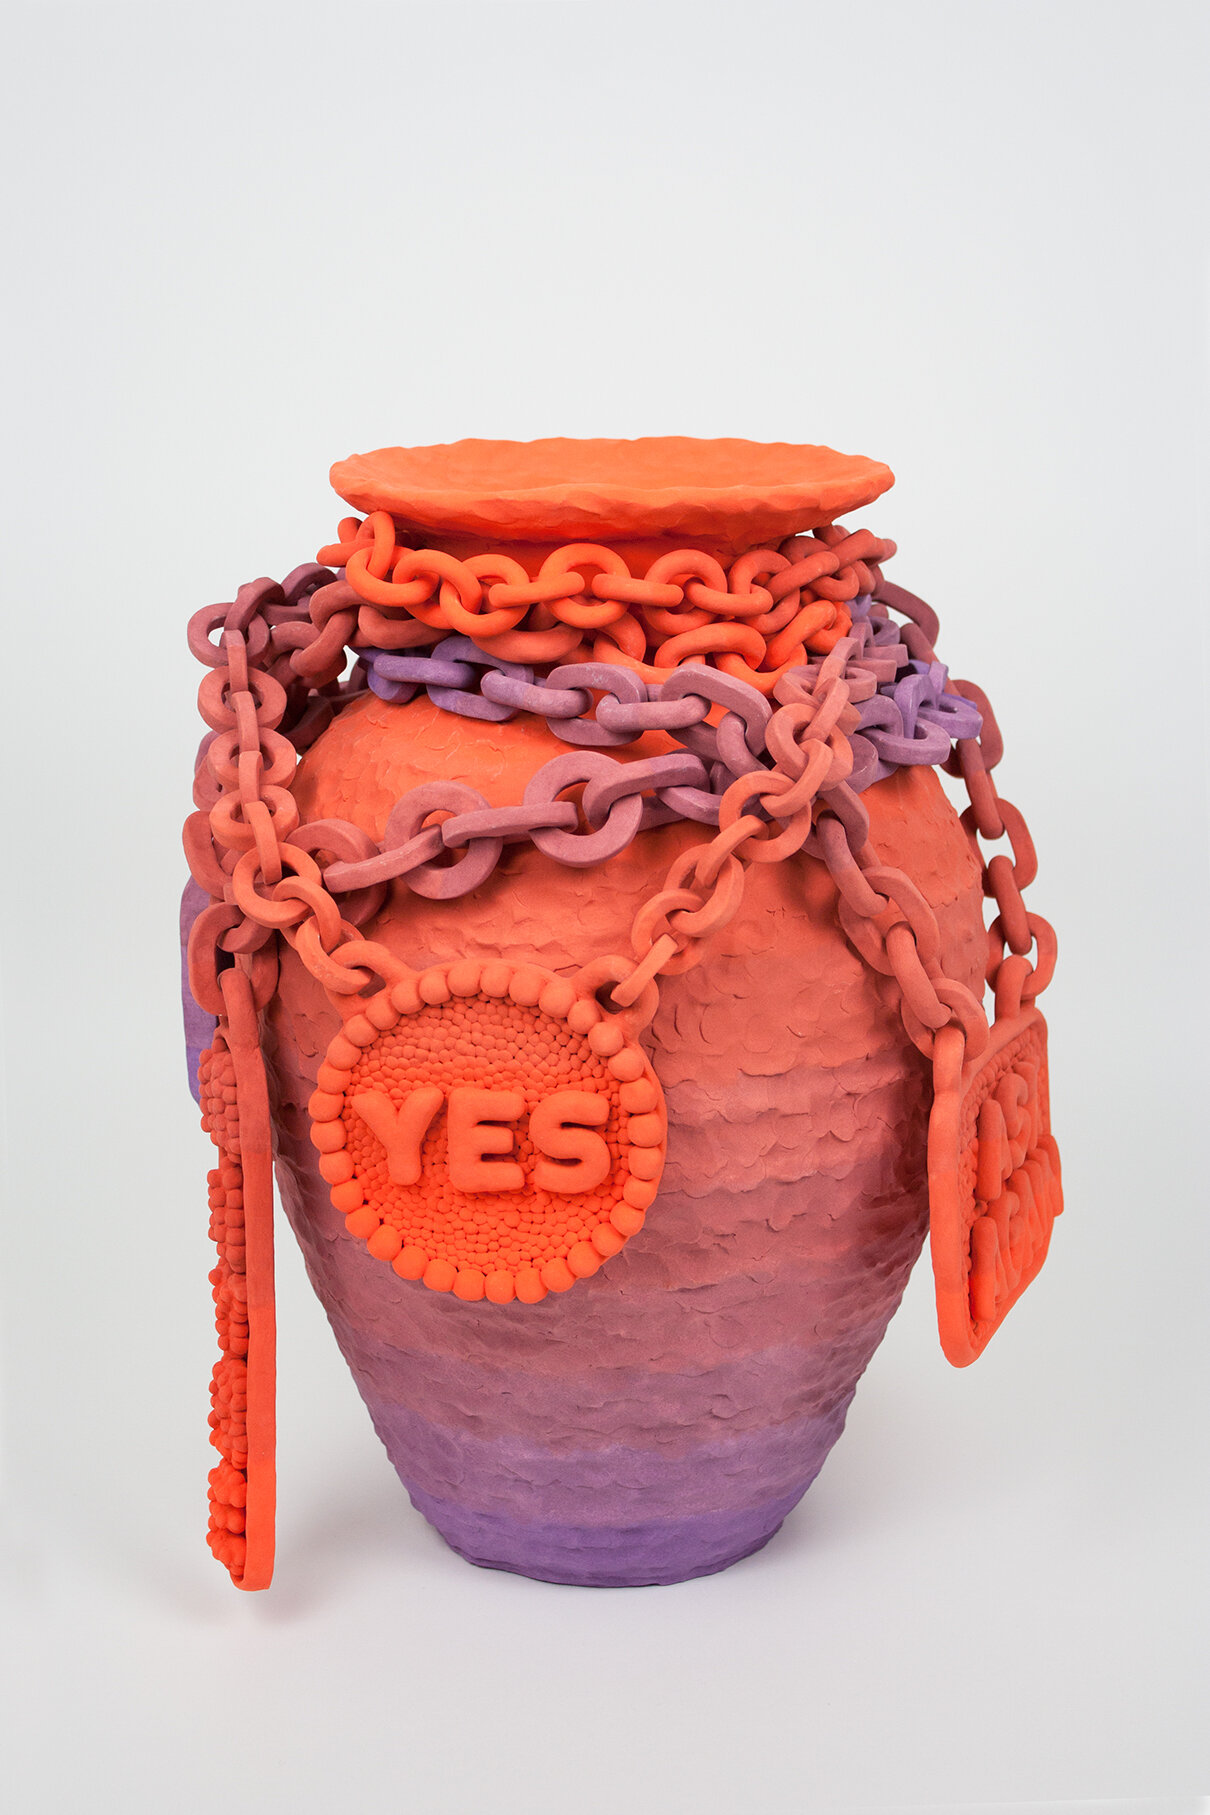 Mathieu-Frossard-Yes-No-Maybe-I-Don-t-Know-Ask-Again-2019-Earthenware-Underglaze-Glaze--410x340x340mm-A-.jpg